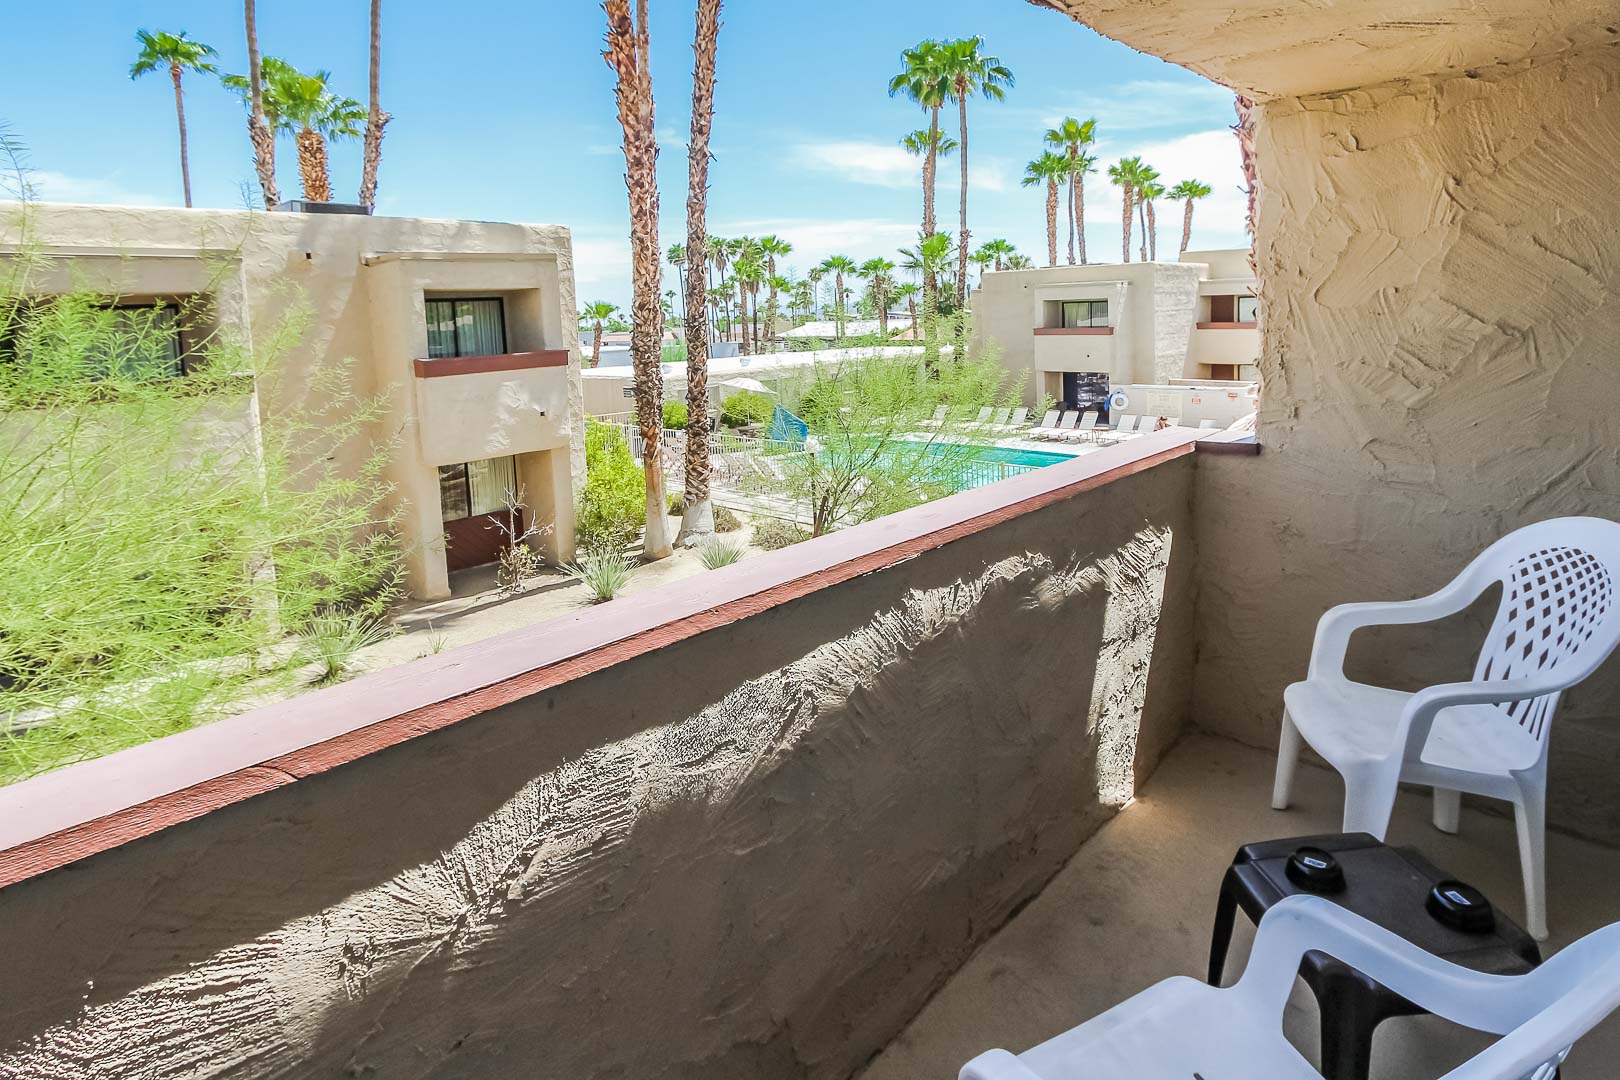 A peaceful balcony view at VRI's Desert Vacation Villas in Palm Springs California.